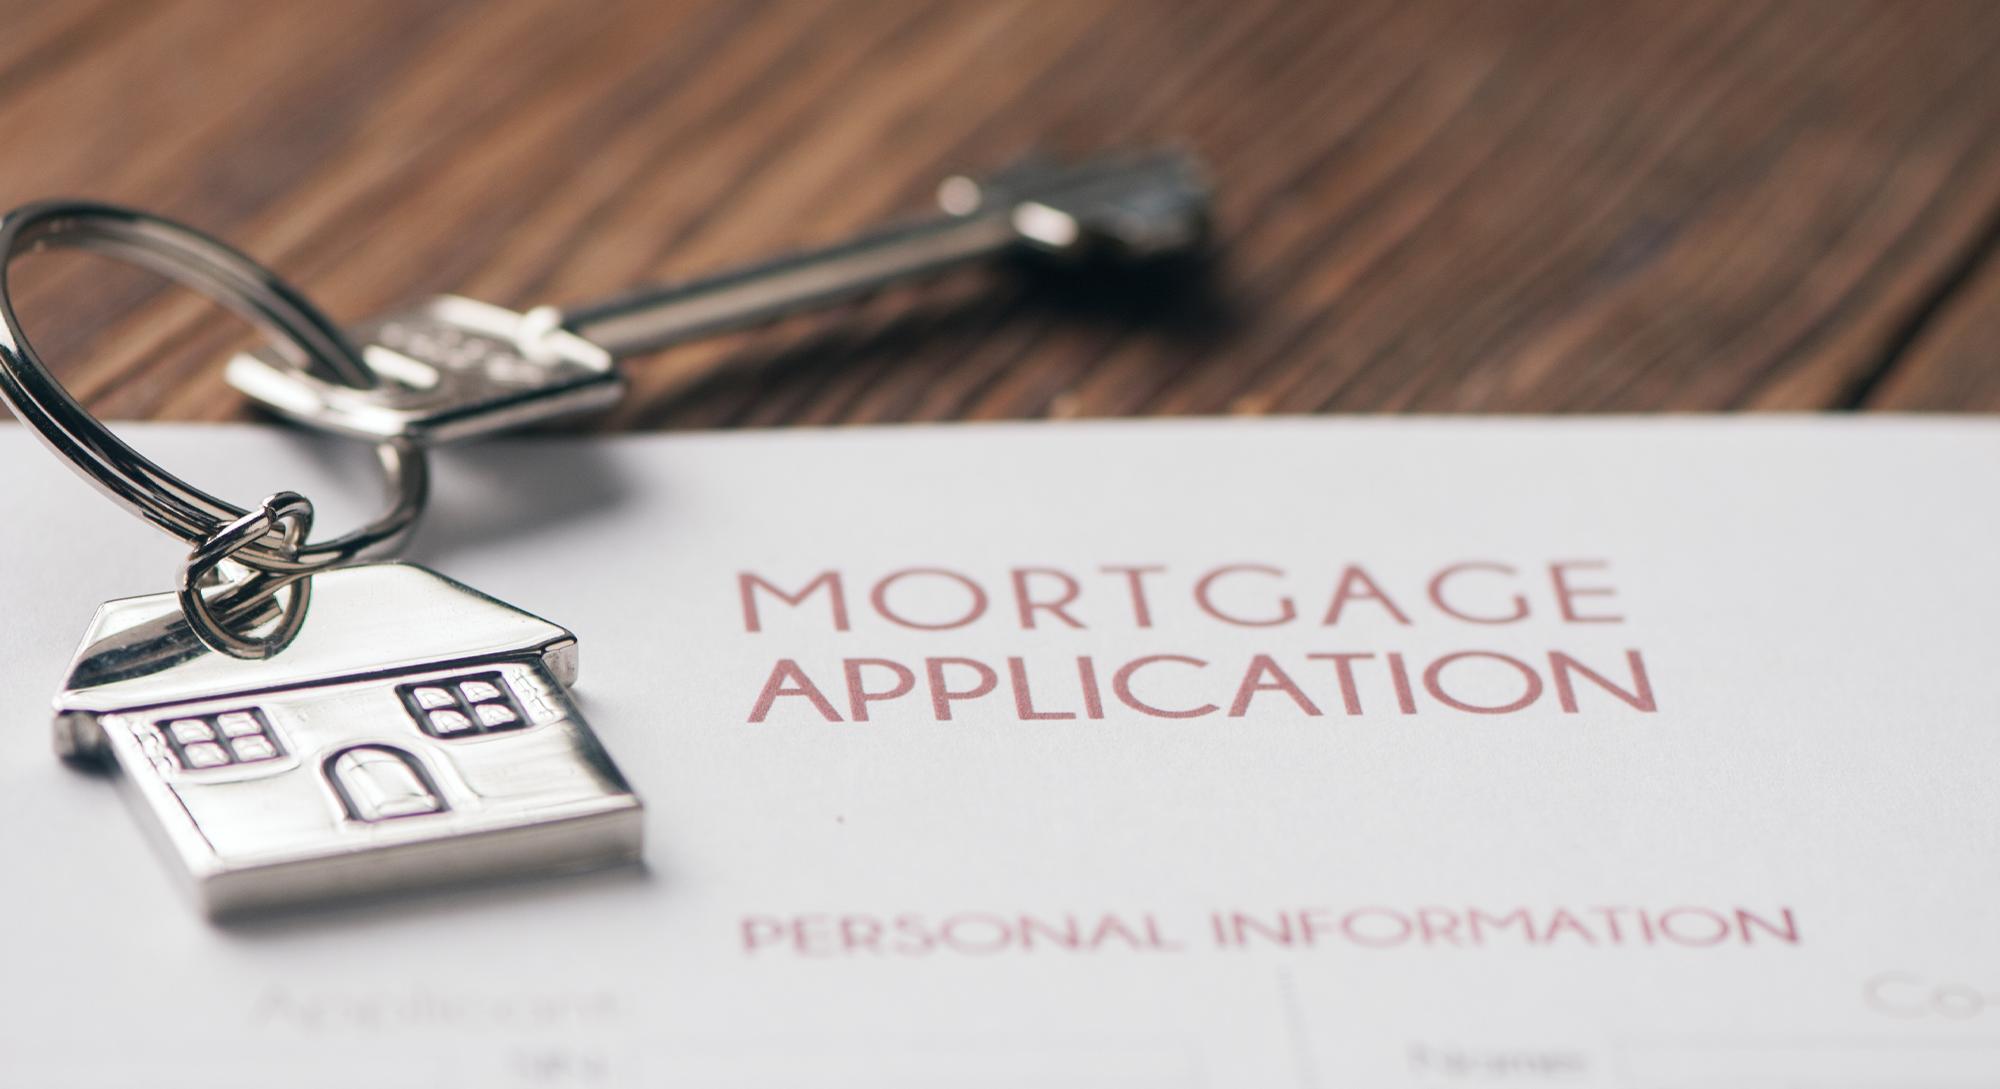 mortgage application with keys